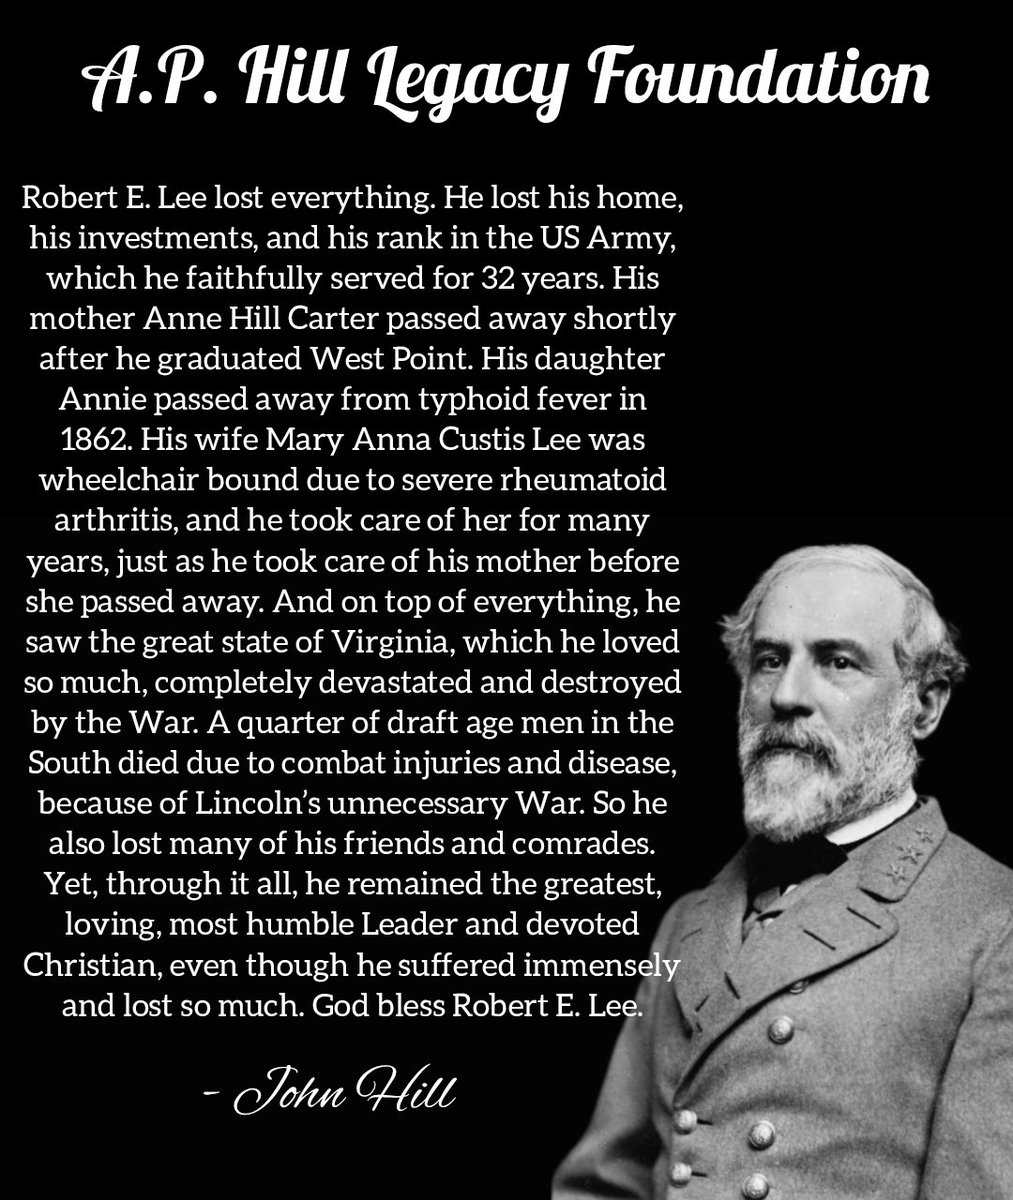 Robert E. Lee lost everything. He lost his home, his investments, and his rank in the US Army, which he faithfully served for 32 years. His mother Anne Hill Carter passed away shortly after he graduated West Point. His daughter Annie passed away from typhoid fever in 1862. His…